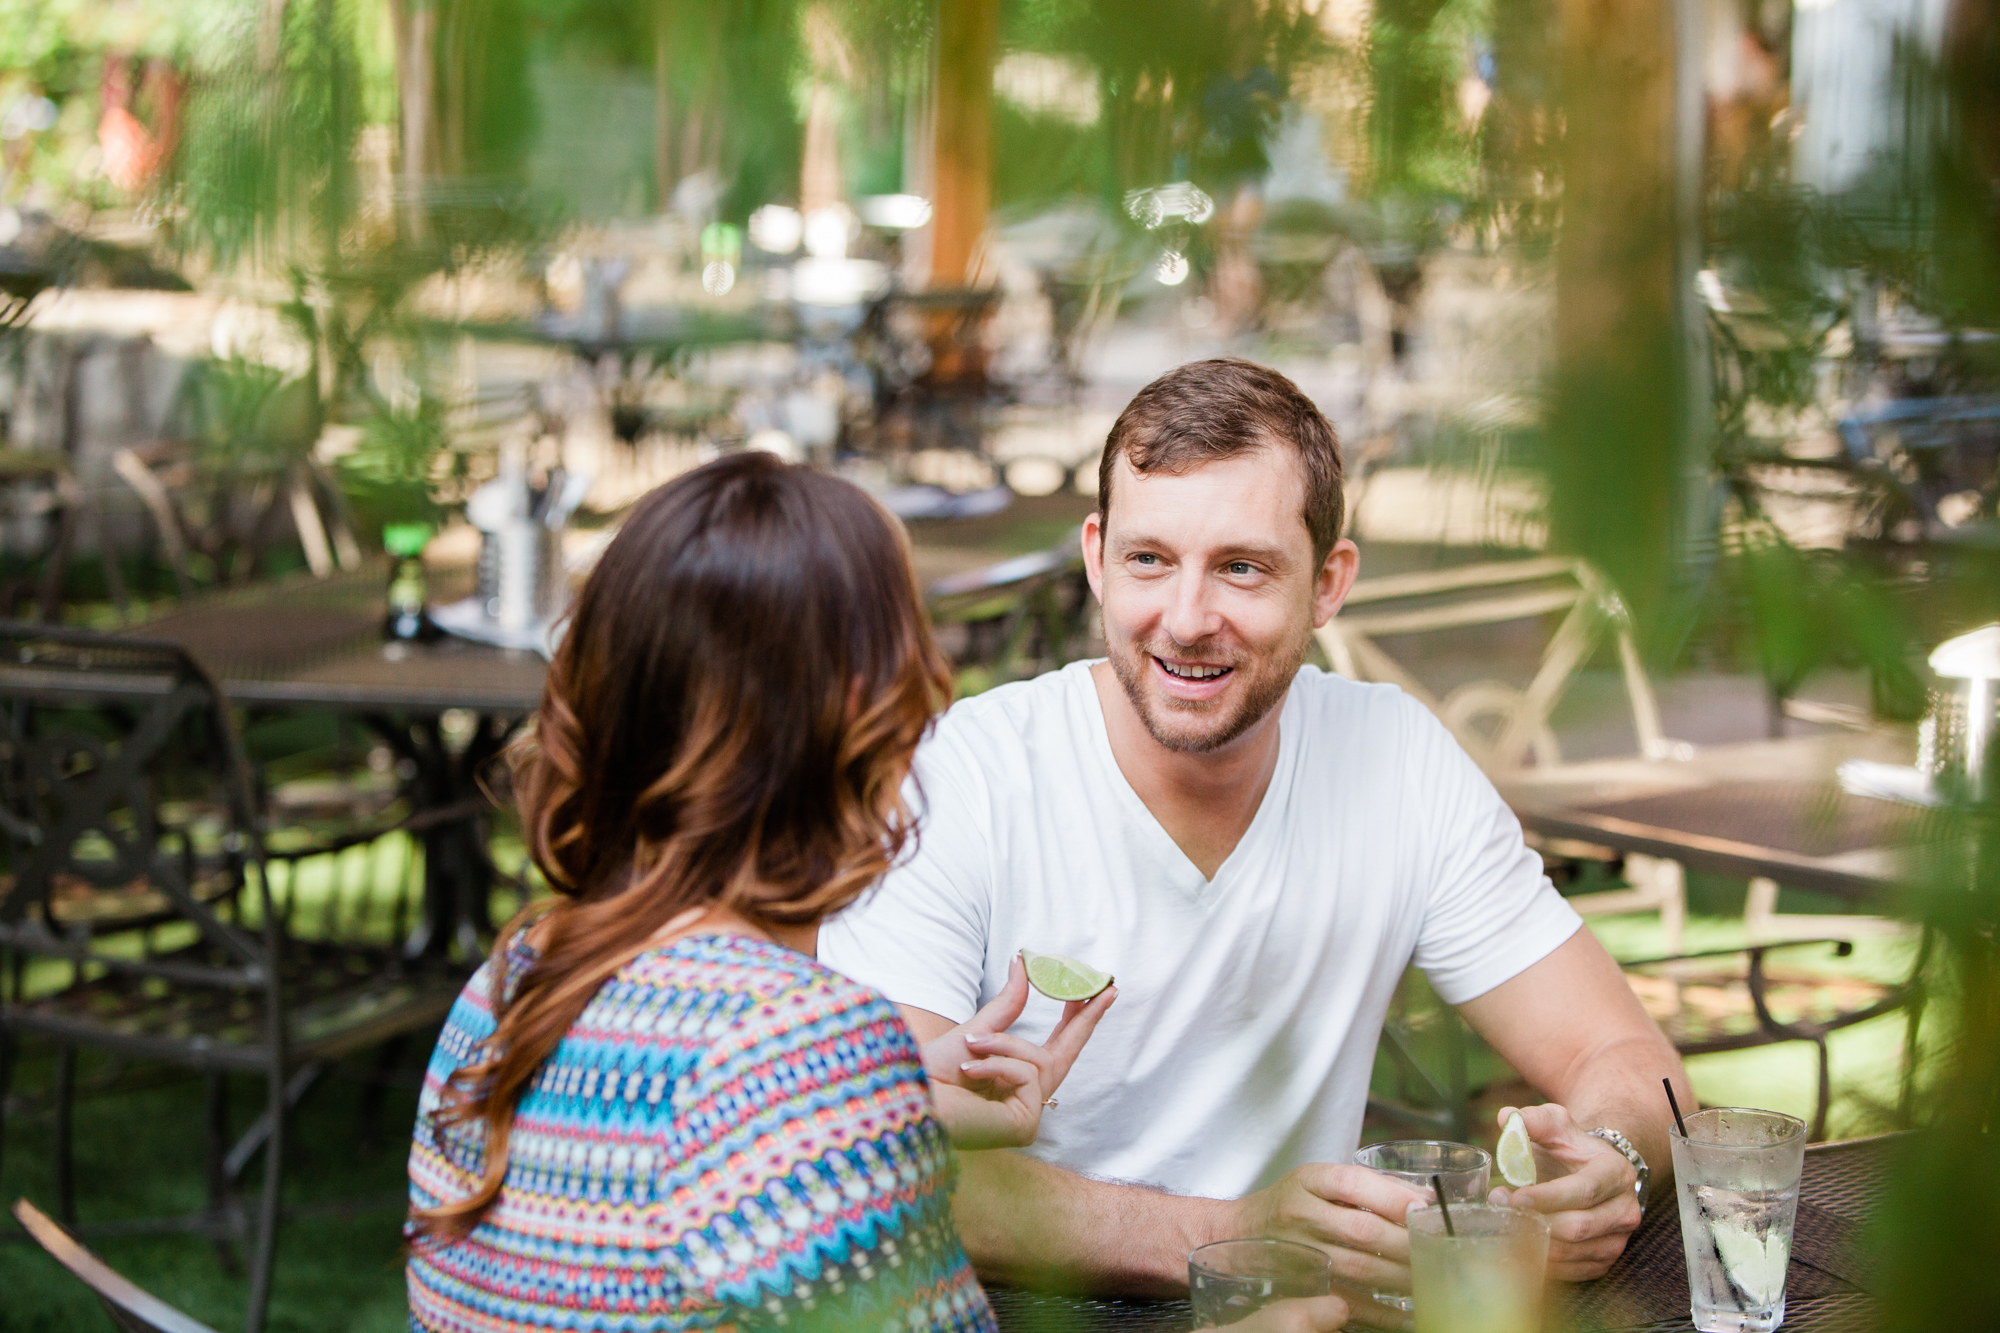 Need a drink before your engagement photos in Atlanta? Park Tavern is a perfect pit stop before photos in Piedmont Park!